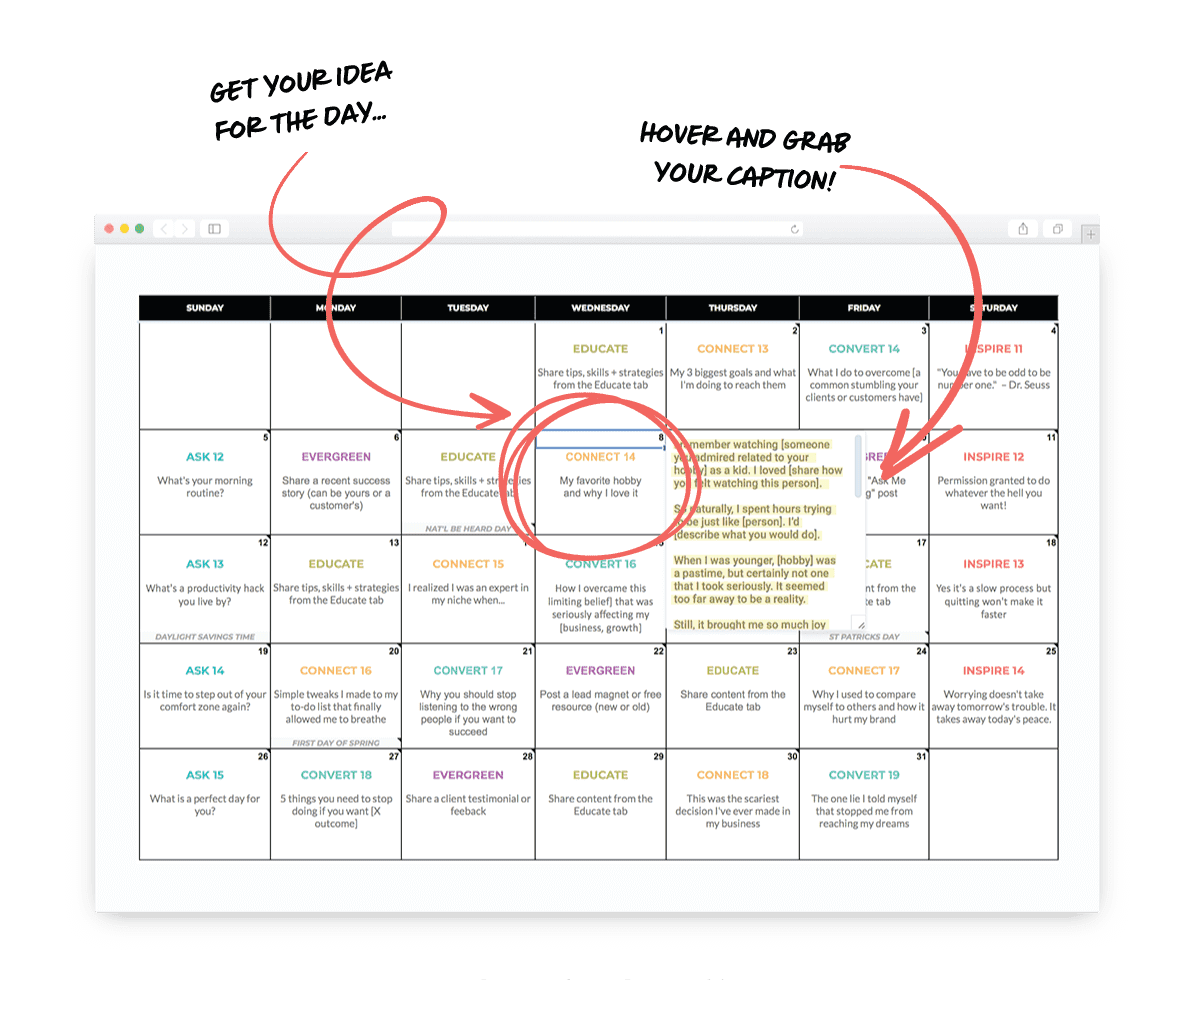 The Content Calendar System is flexible and easy to use